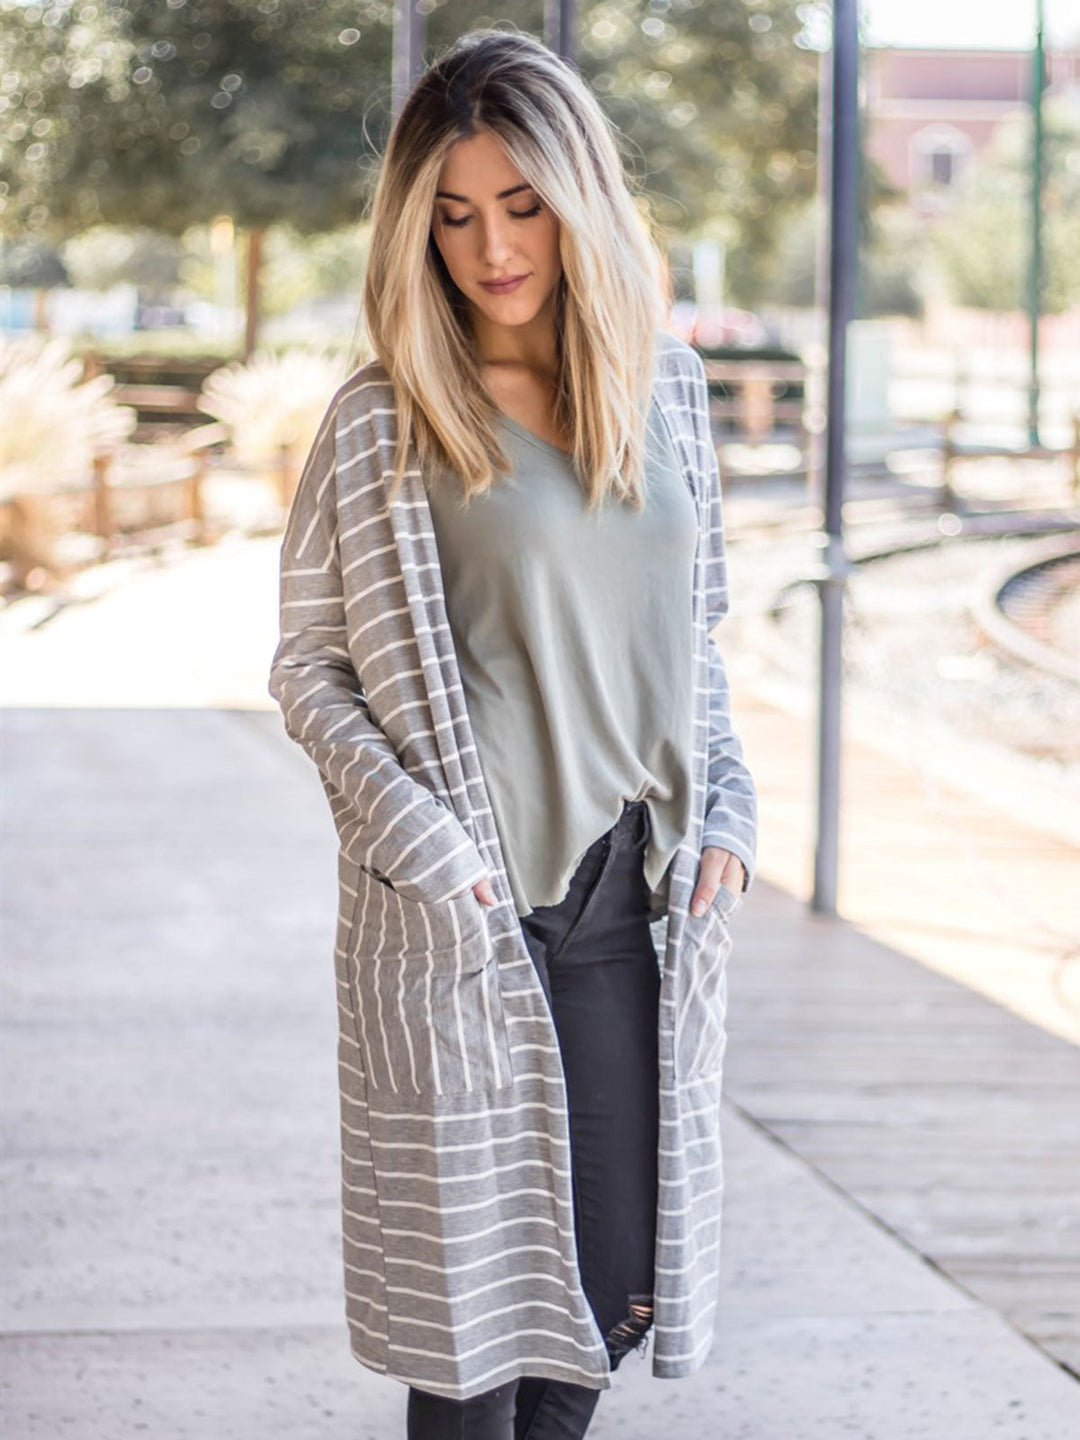 The Striped Leah Cardigan